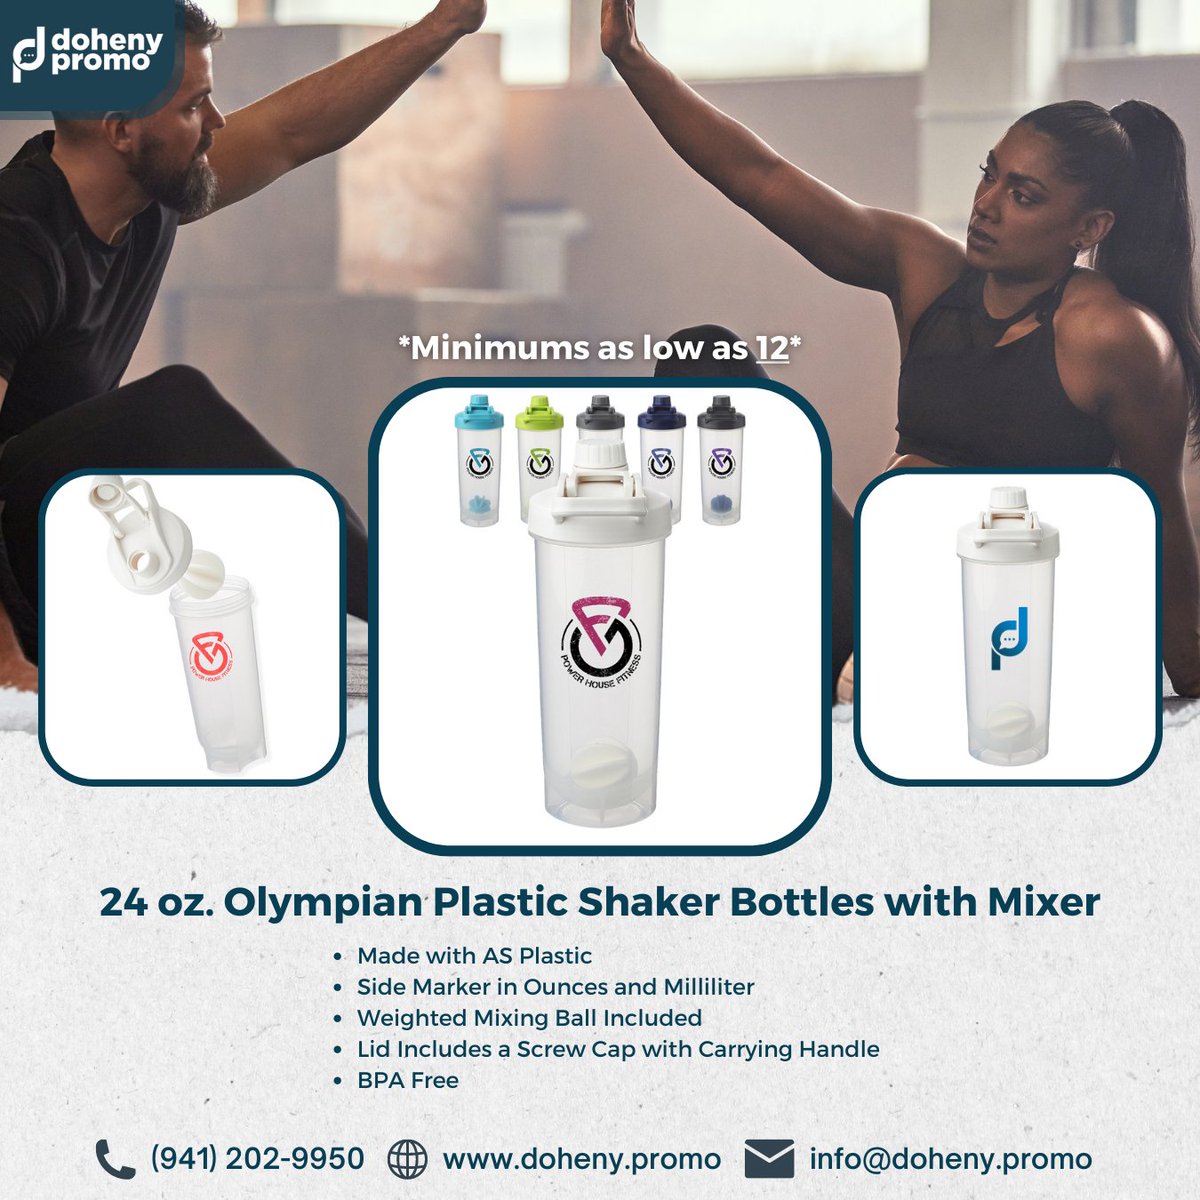 Custom shaker bottles make great promotional items for gyms, fitness clubs, CrossFit centers, trainers, and sports teams.

Contact us today for pricing!

Stand Out. BE SEEN.

#promotionalproductswork | #brandawareness | #marketing | #fitness | #smallbiz | #veteranowned